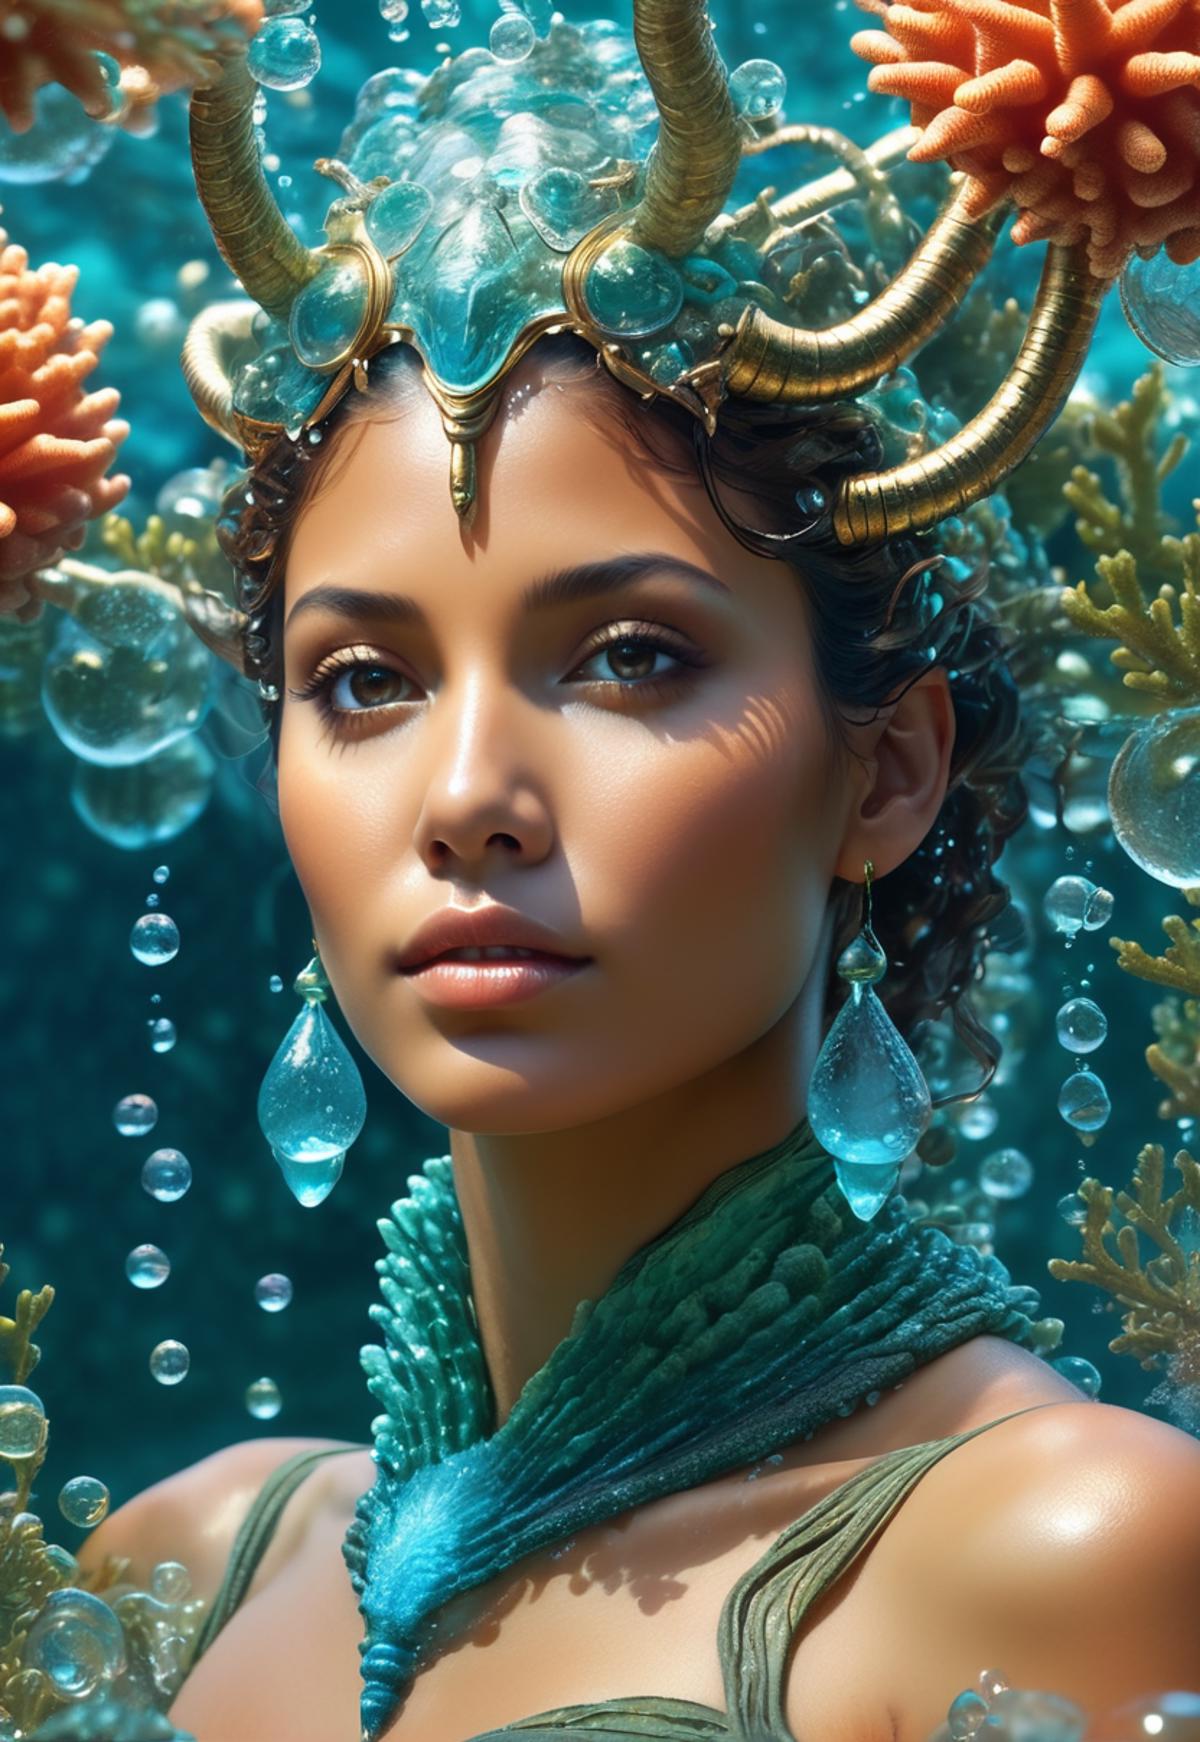 A beautiful woman with blue eyes, wearing a green crown and earrings, surrounded by water droplets and coral.